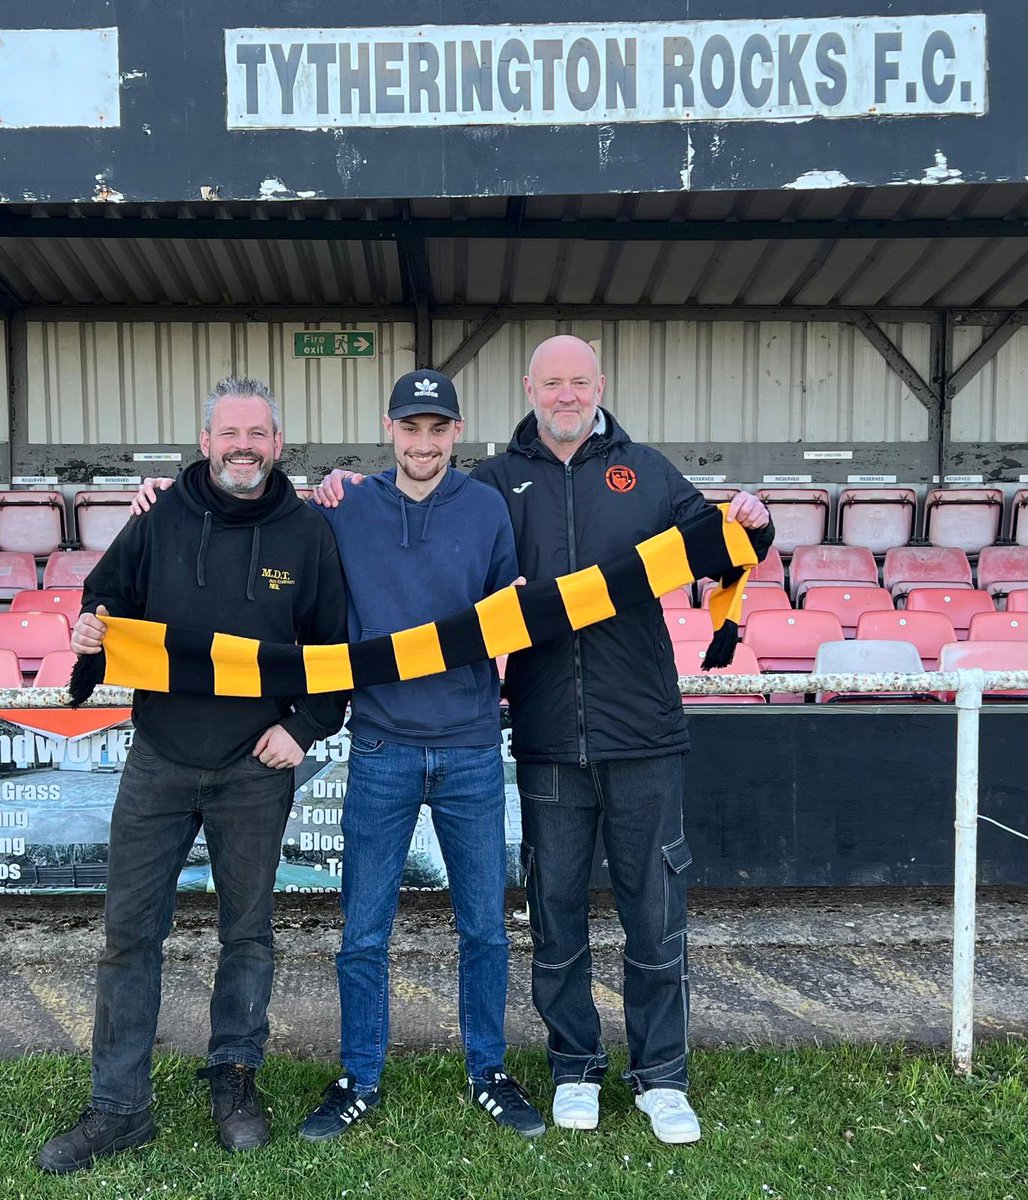 🟠⚫️🚨

The Rocks have a Reserves

Liam Cook and Neil Bennett  will take charge of TRFC Reserve Team next season playing in Hellenic League Division 2 West

@hfl_news @HellenicLeague @NonLeagueHQ1 @NLBIBLE4 @NL_Matters @NonLeagueCrowd @NonLeagueMaps @SevernSport @TigerSportPhot1